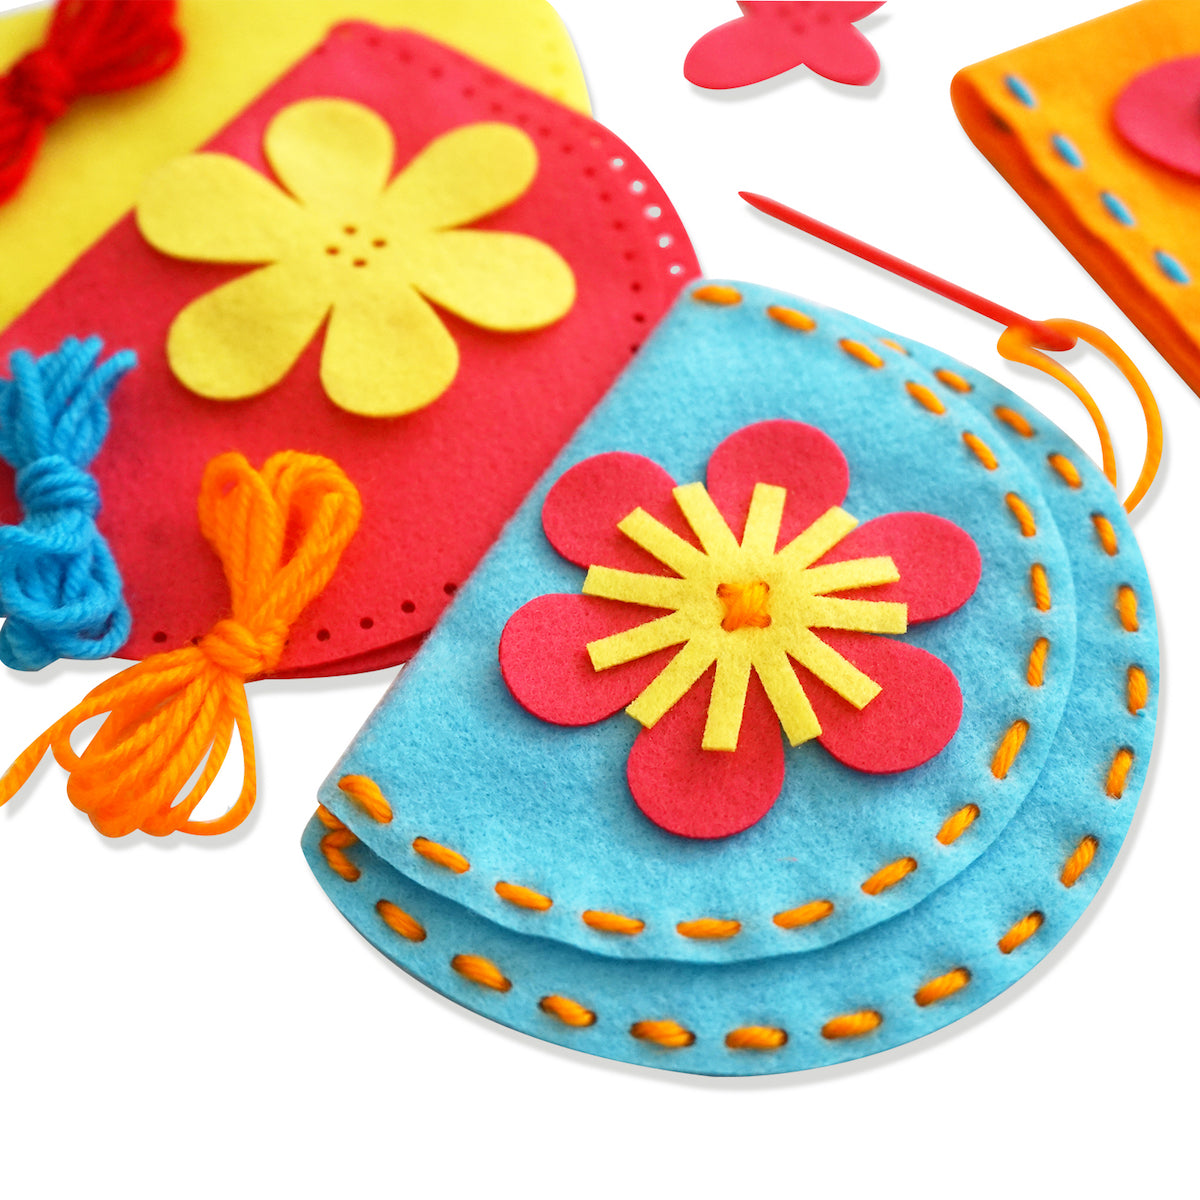 Flying Childhood Felt Crafts for Girls Sewing Own Bags and Purses